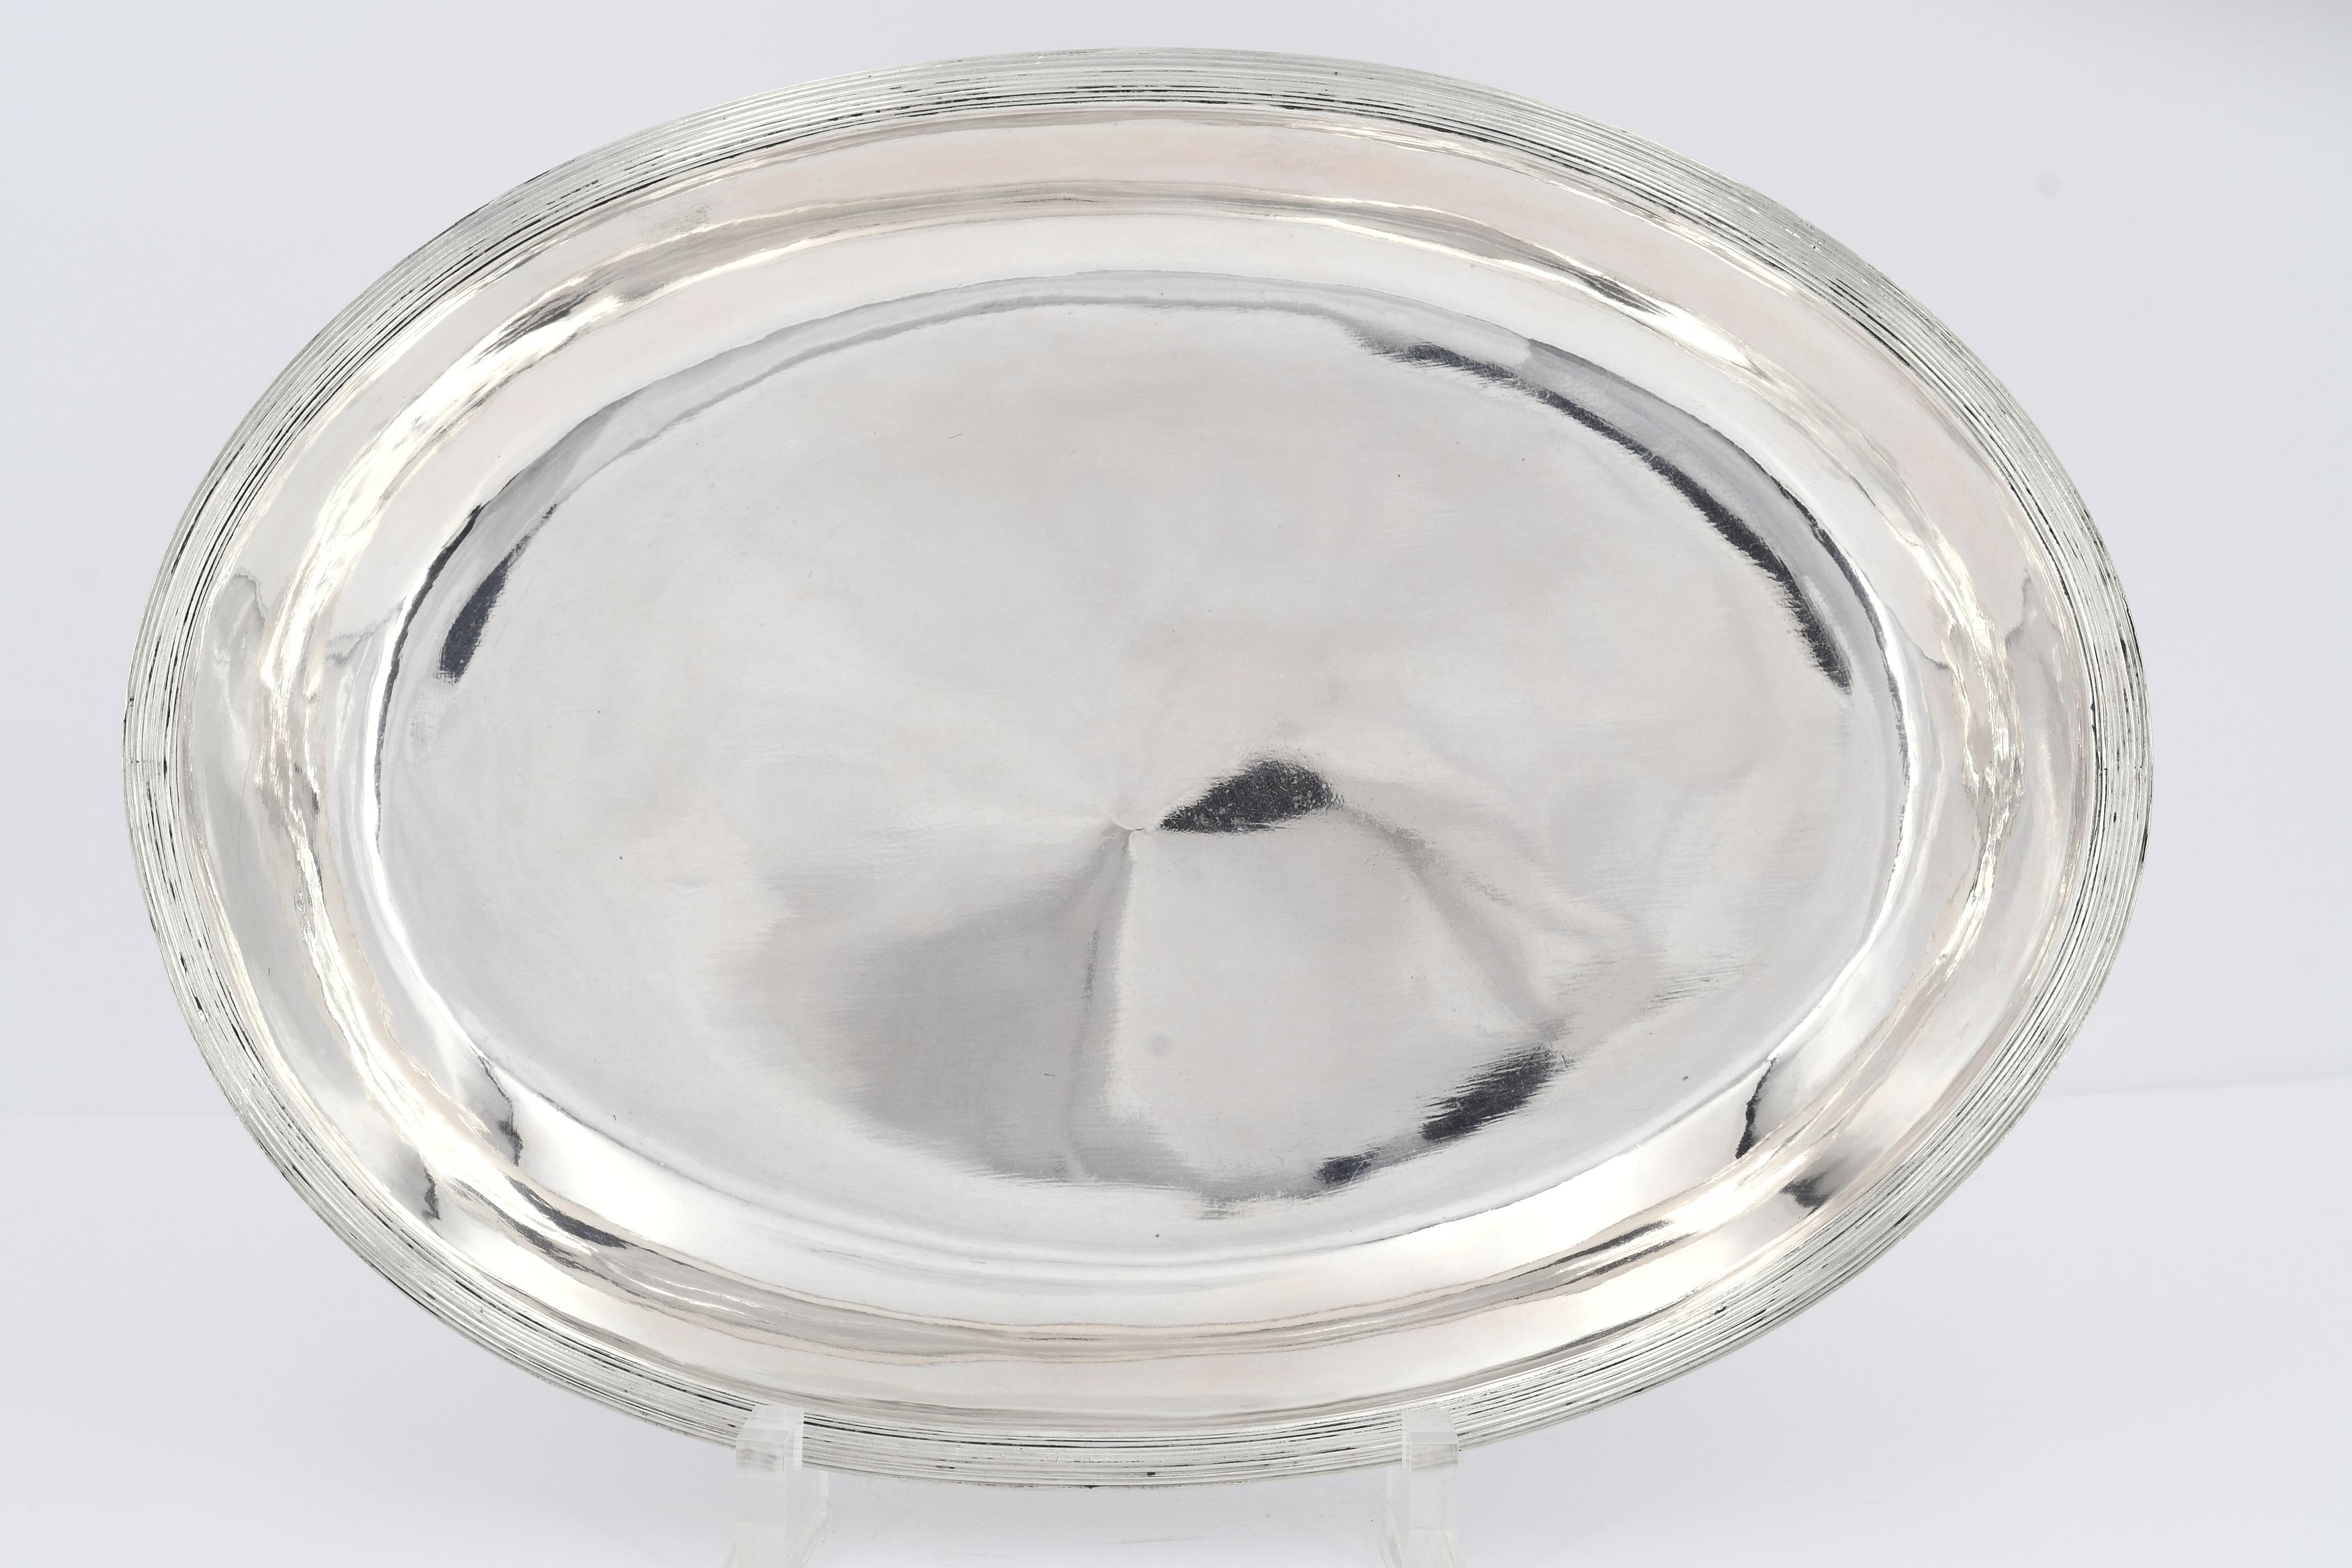 Oval silver serving dish with serrated rim - Image 2 of 4